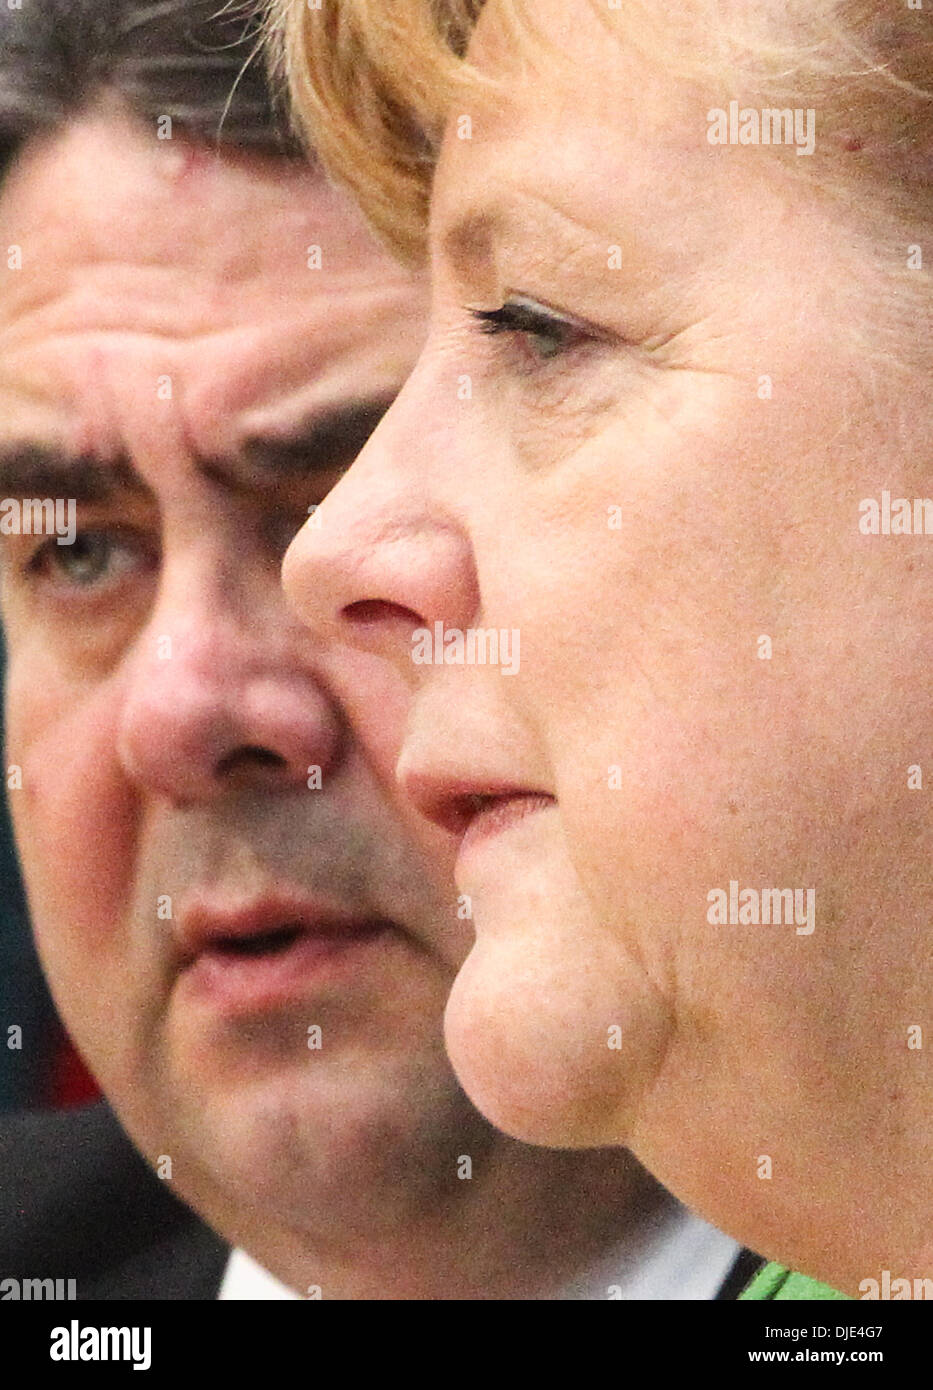 Berlin, Germany. 27th Nov, 2013. Sigmar Gabriel (L), Chairman of the Social Democratic Party (SPD) and German Chancellor Angela Merkel attend a press conference in Berlin, Germany, on Nov. 27, 2013. Leaders from Germany's main parties signed provisionally a coalition agreement on Wednesday, paving the road for forming a new government two months after a federal election. Credit:  Zhang Fan/Xinhua/Alamy Live News Stock Photo